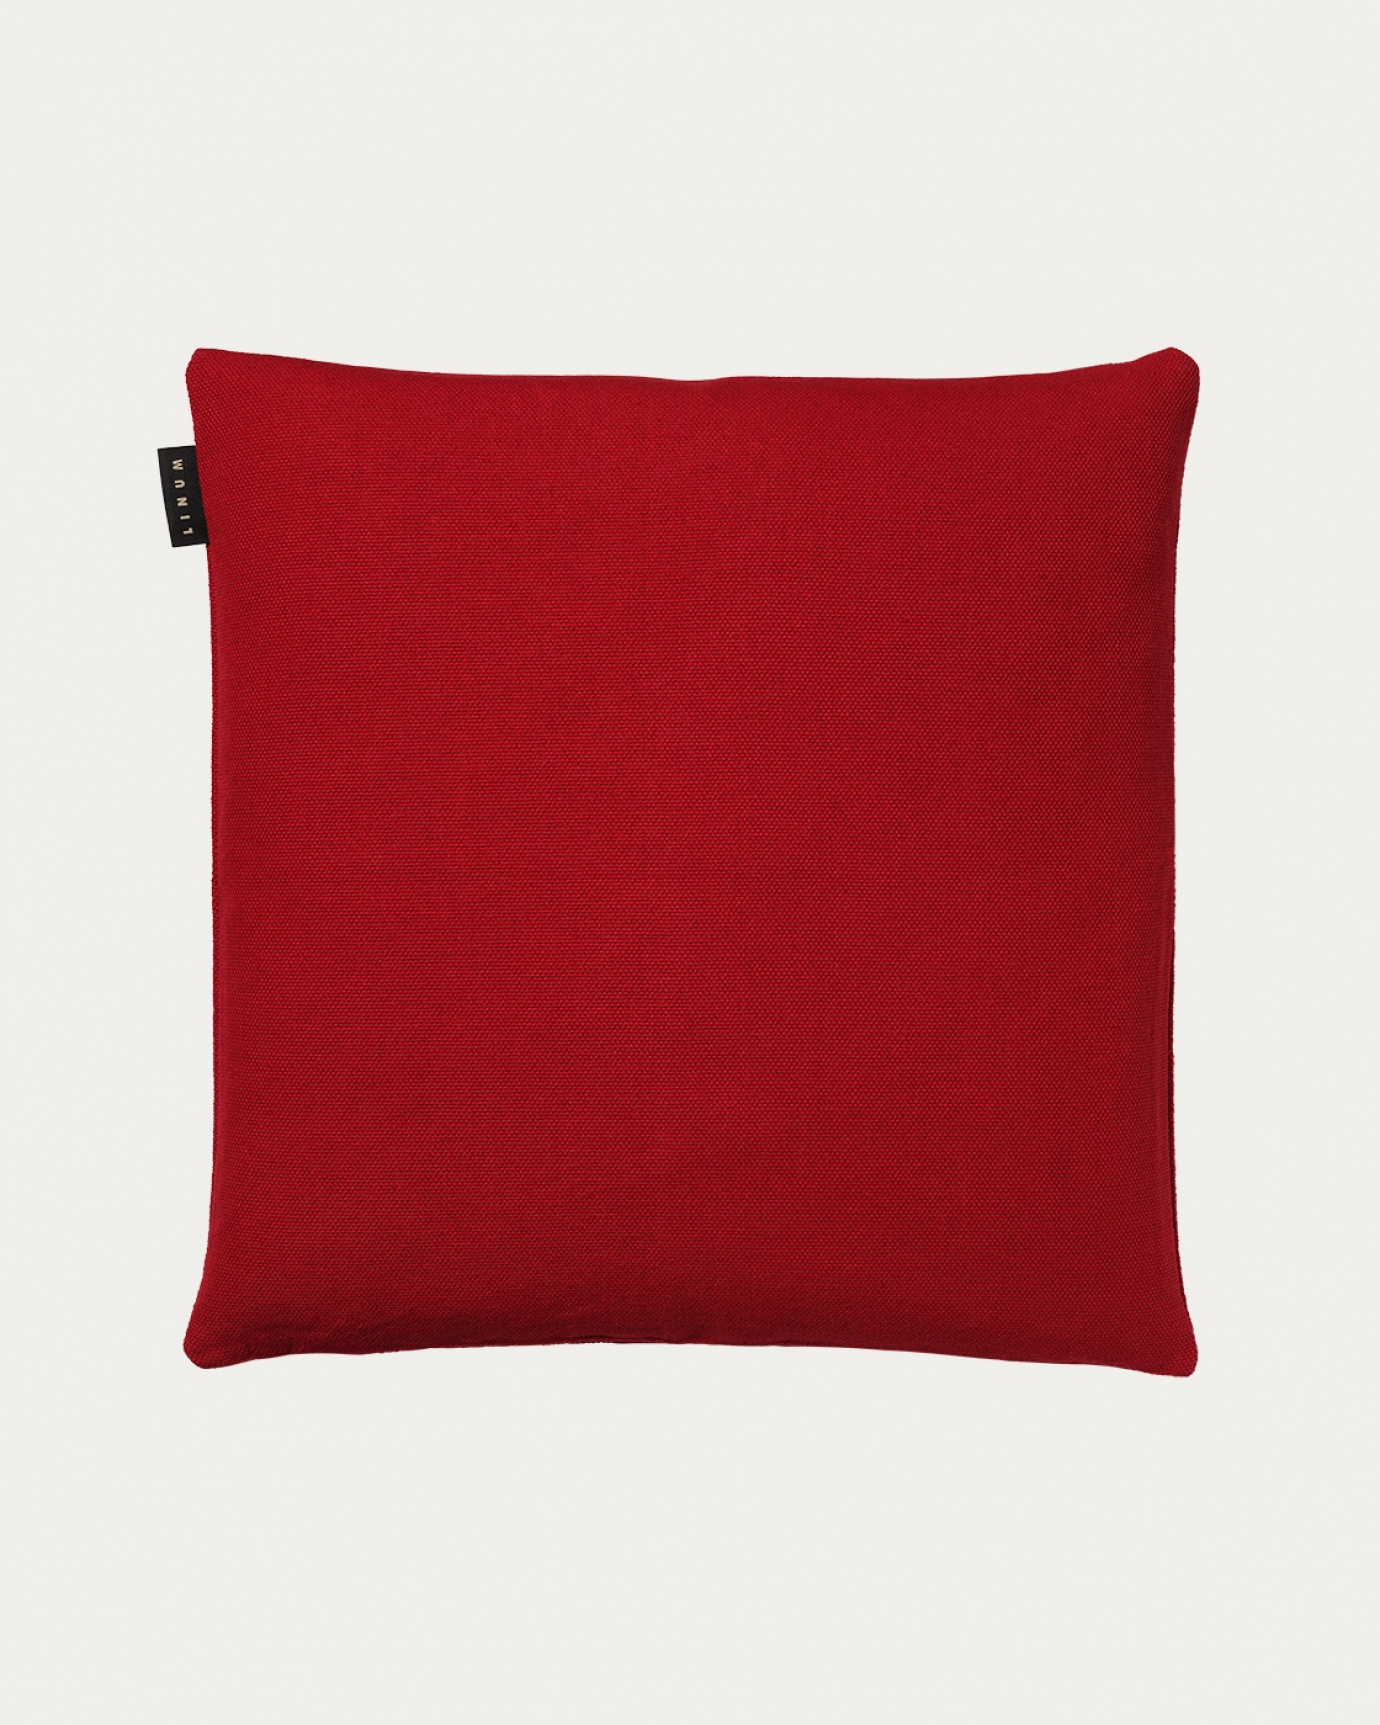 Product image red PEPPER cushion cover made of soft cotton from LINUM DESIGN. Easy to wash and durable for generations. Size 50x50 cm.